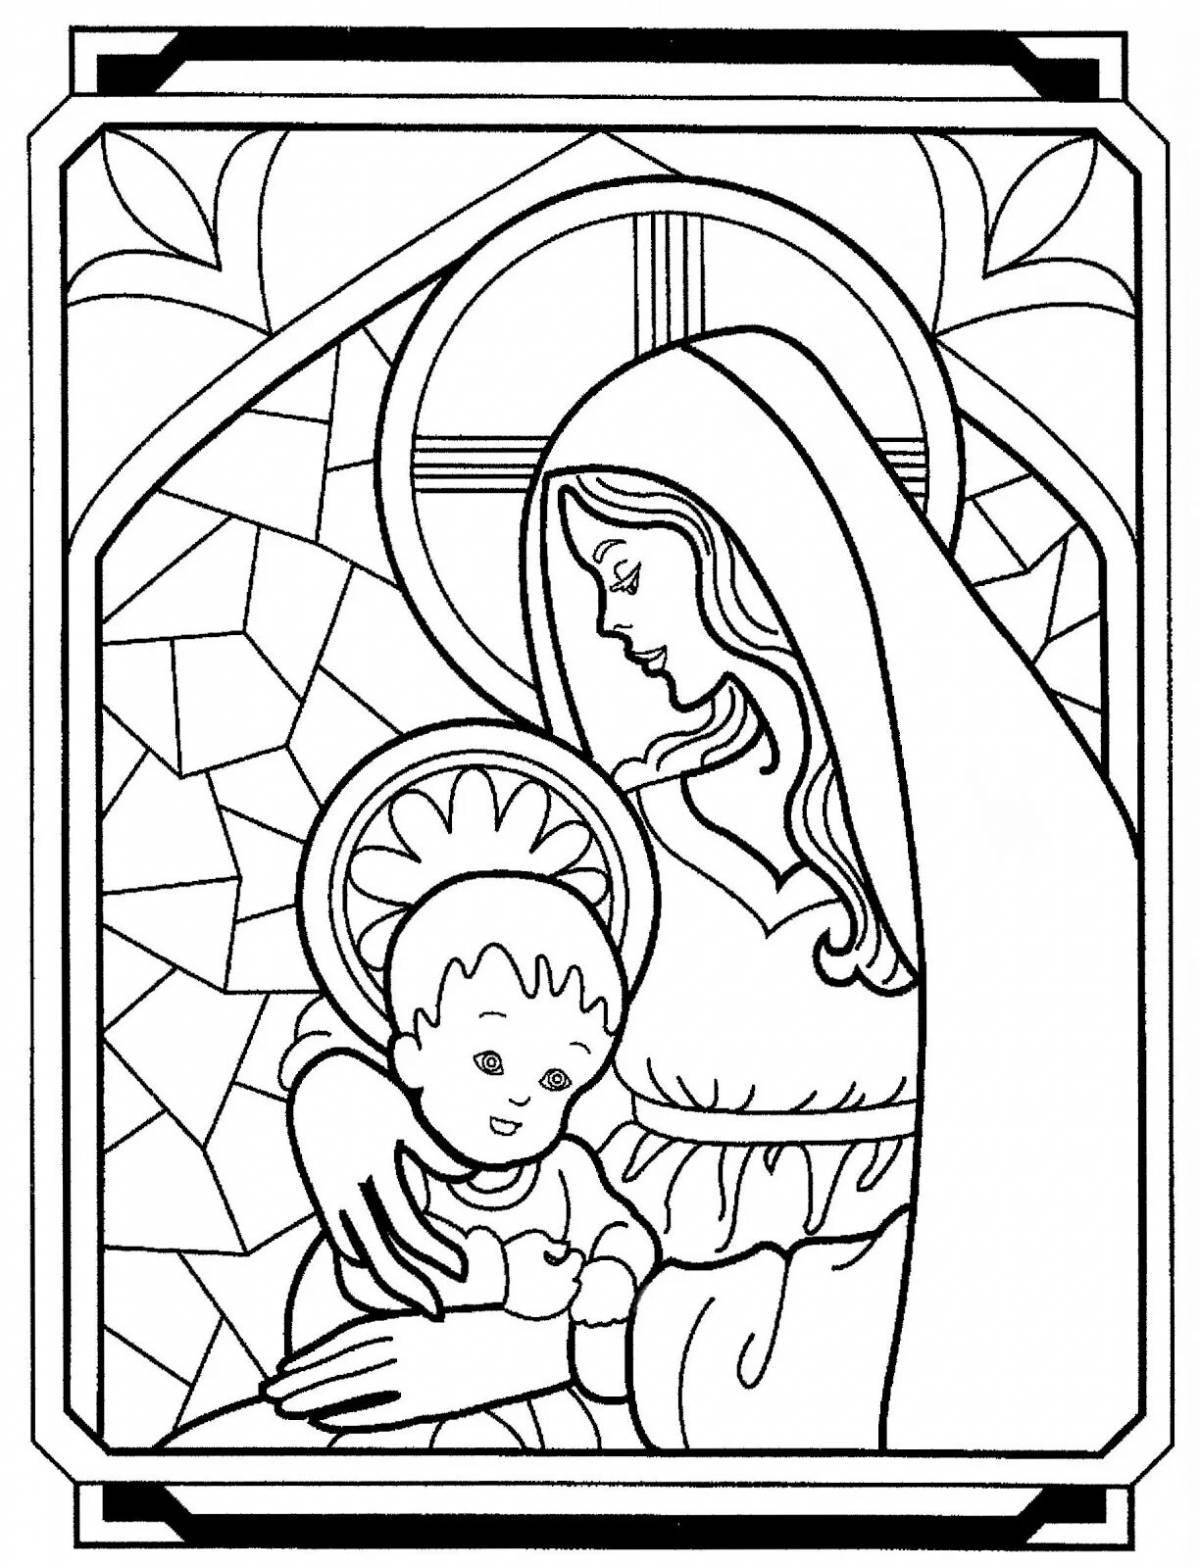 Virgin Mary and Child #8